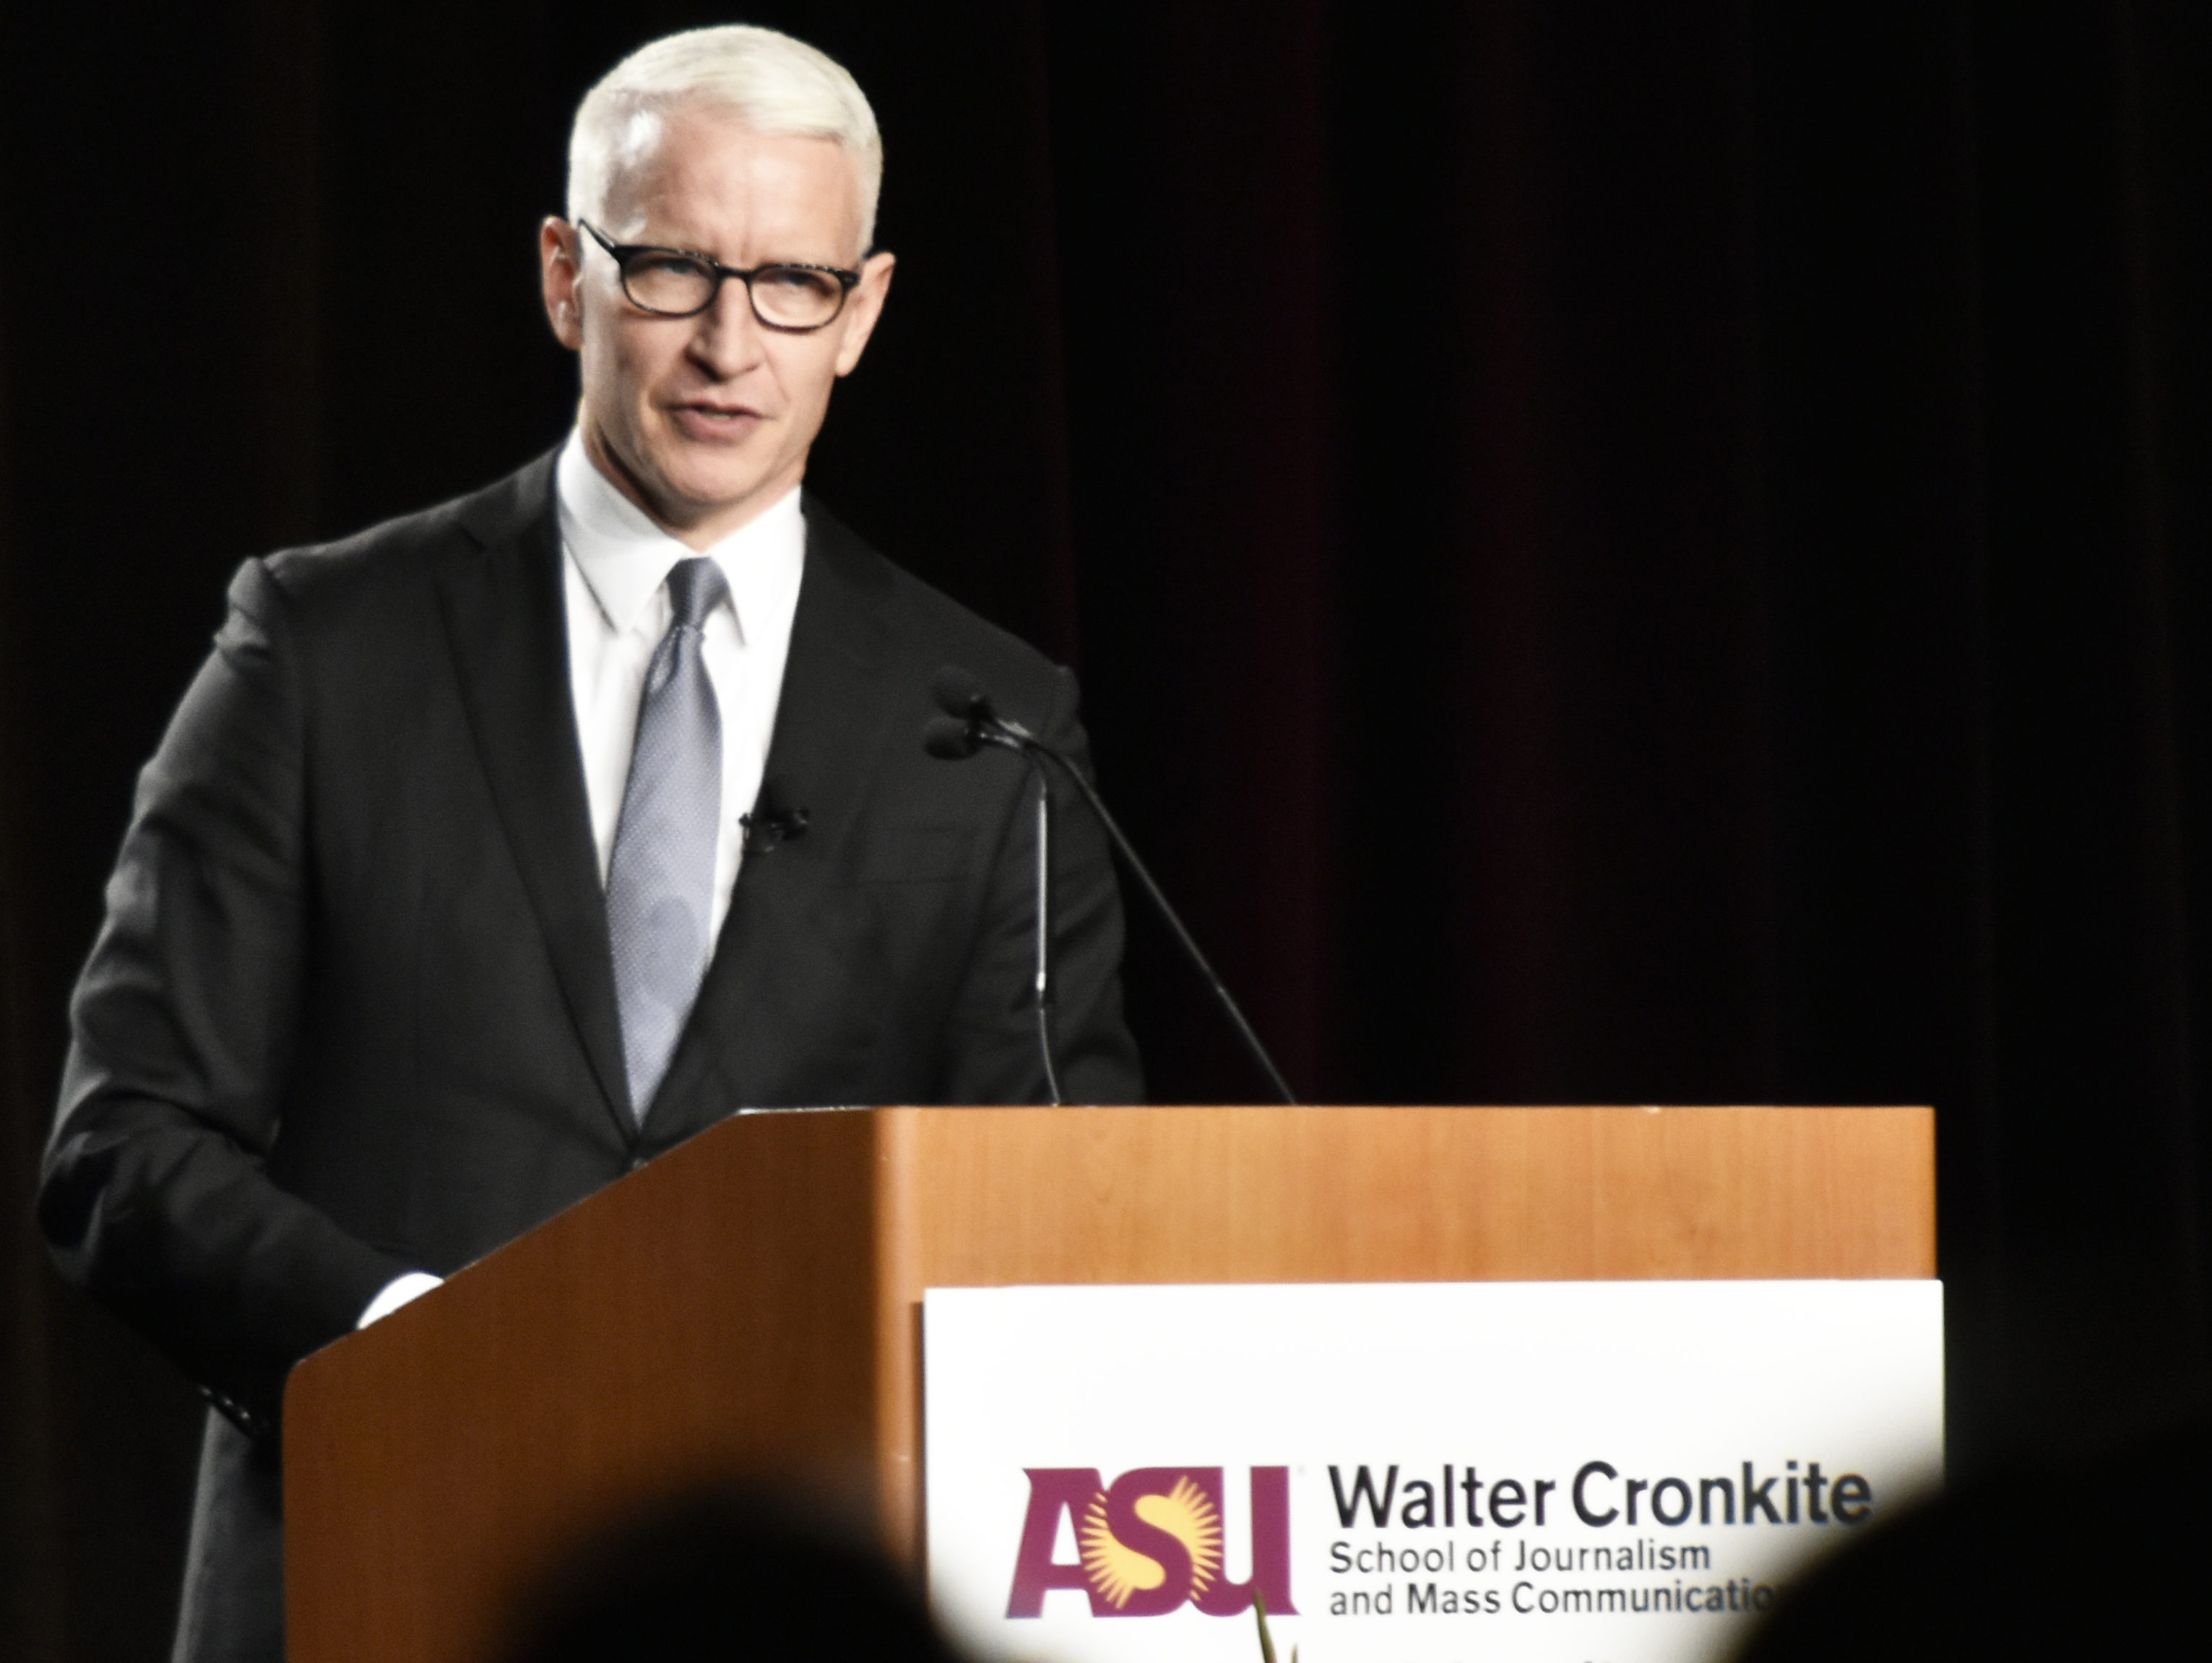 Anderson Cooper awarded at annual Cronkite Awards